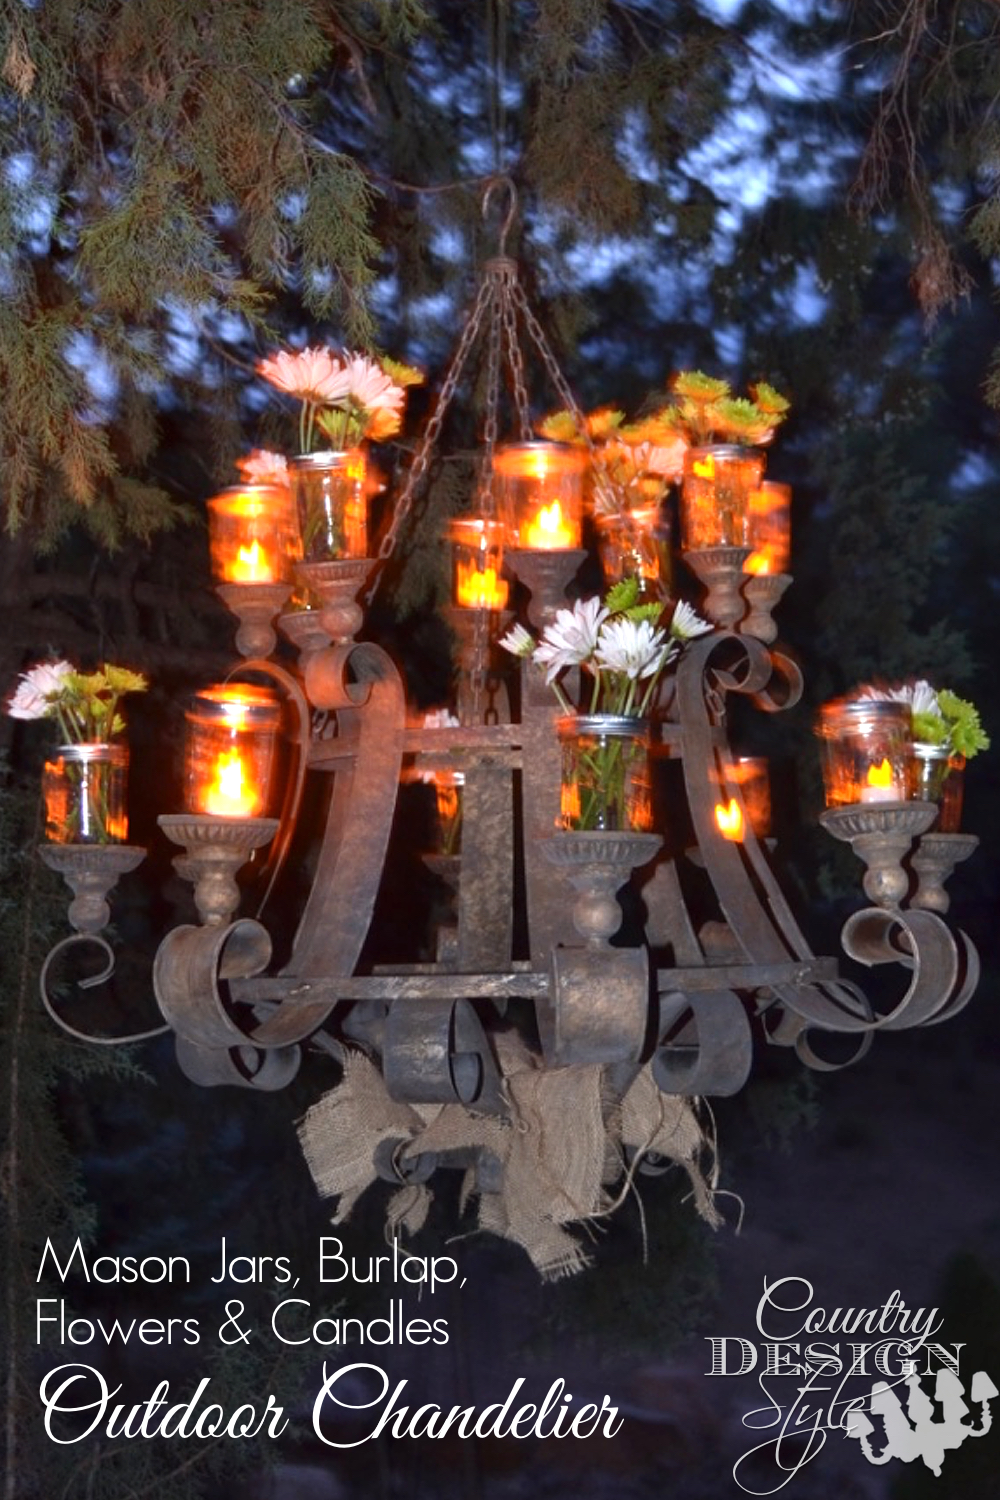 Outdoor chandelier lit up at night. Mason jars hold battery candles and cut flowers. Burlap is rustic and shabby along the bottom. Fun for our family gatherings. Country Design Style www.countrydesignstyle.com